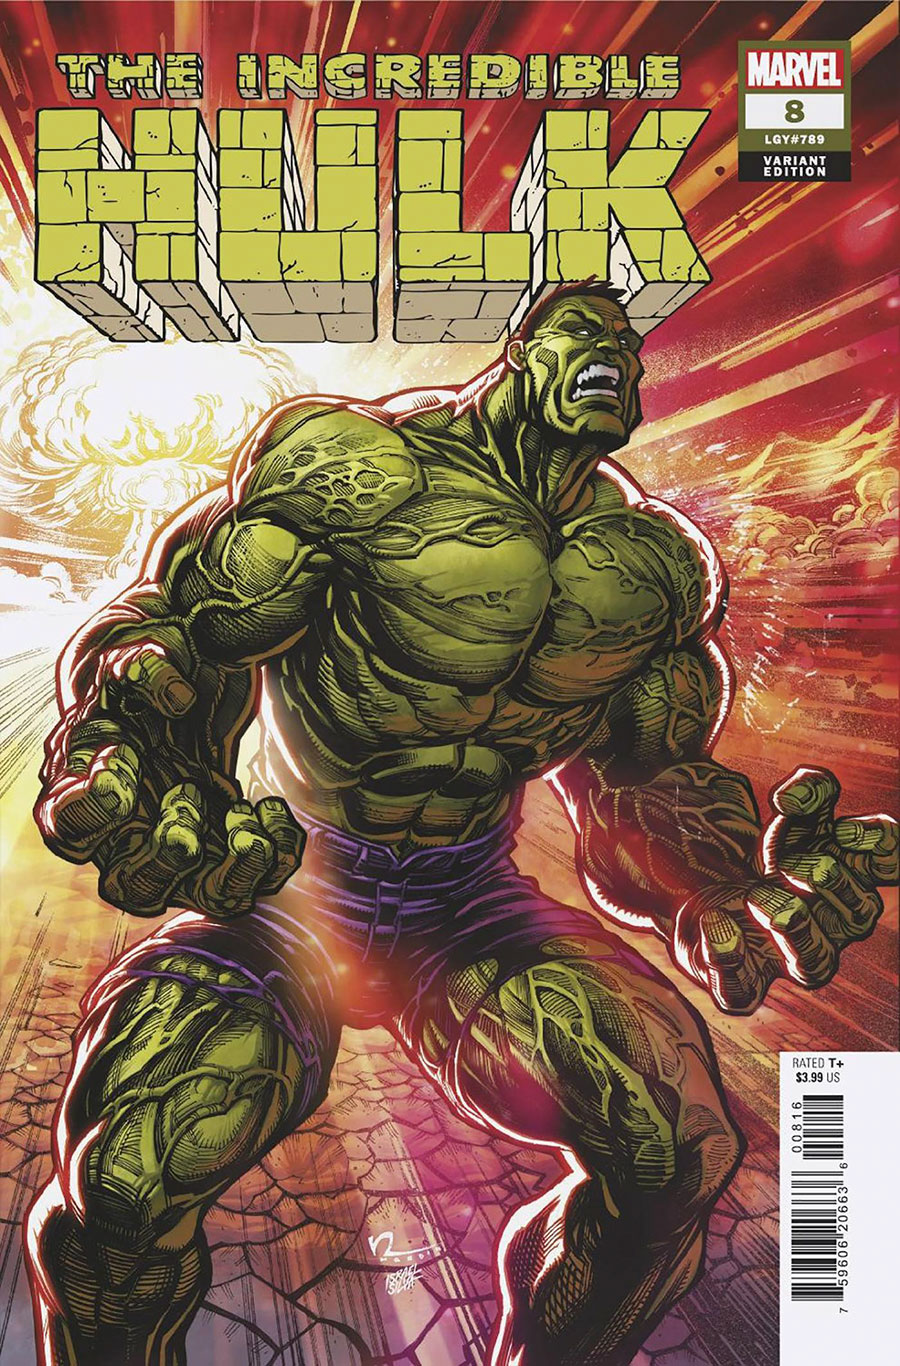 Incredible Hulk Vol 5 #8 Cover C Incentive Chad Hardin Variant Cover